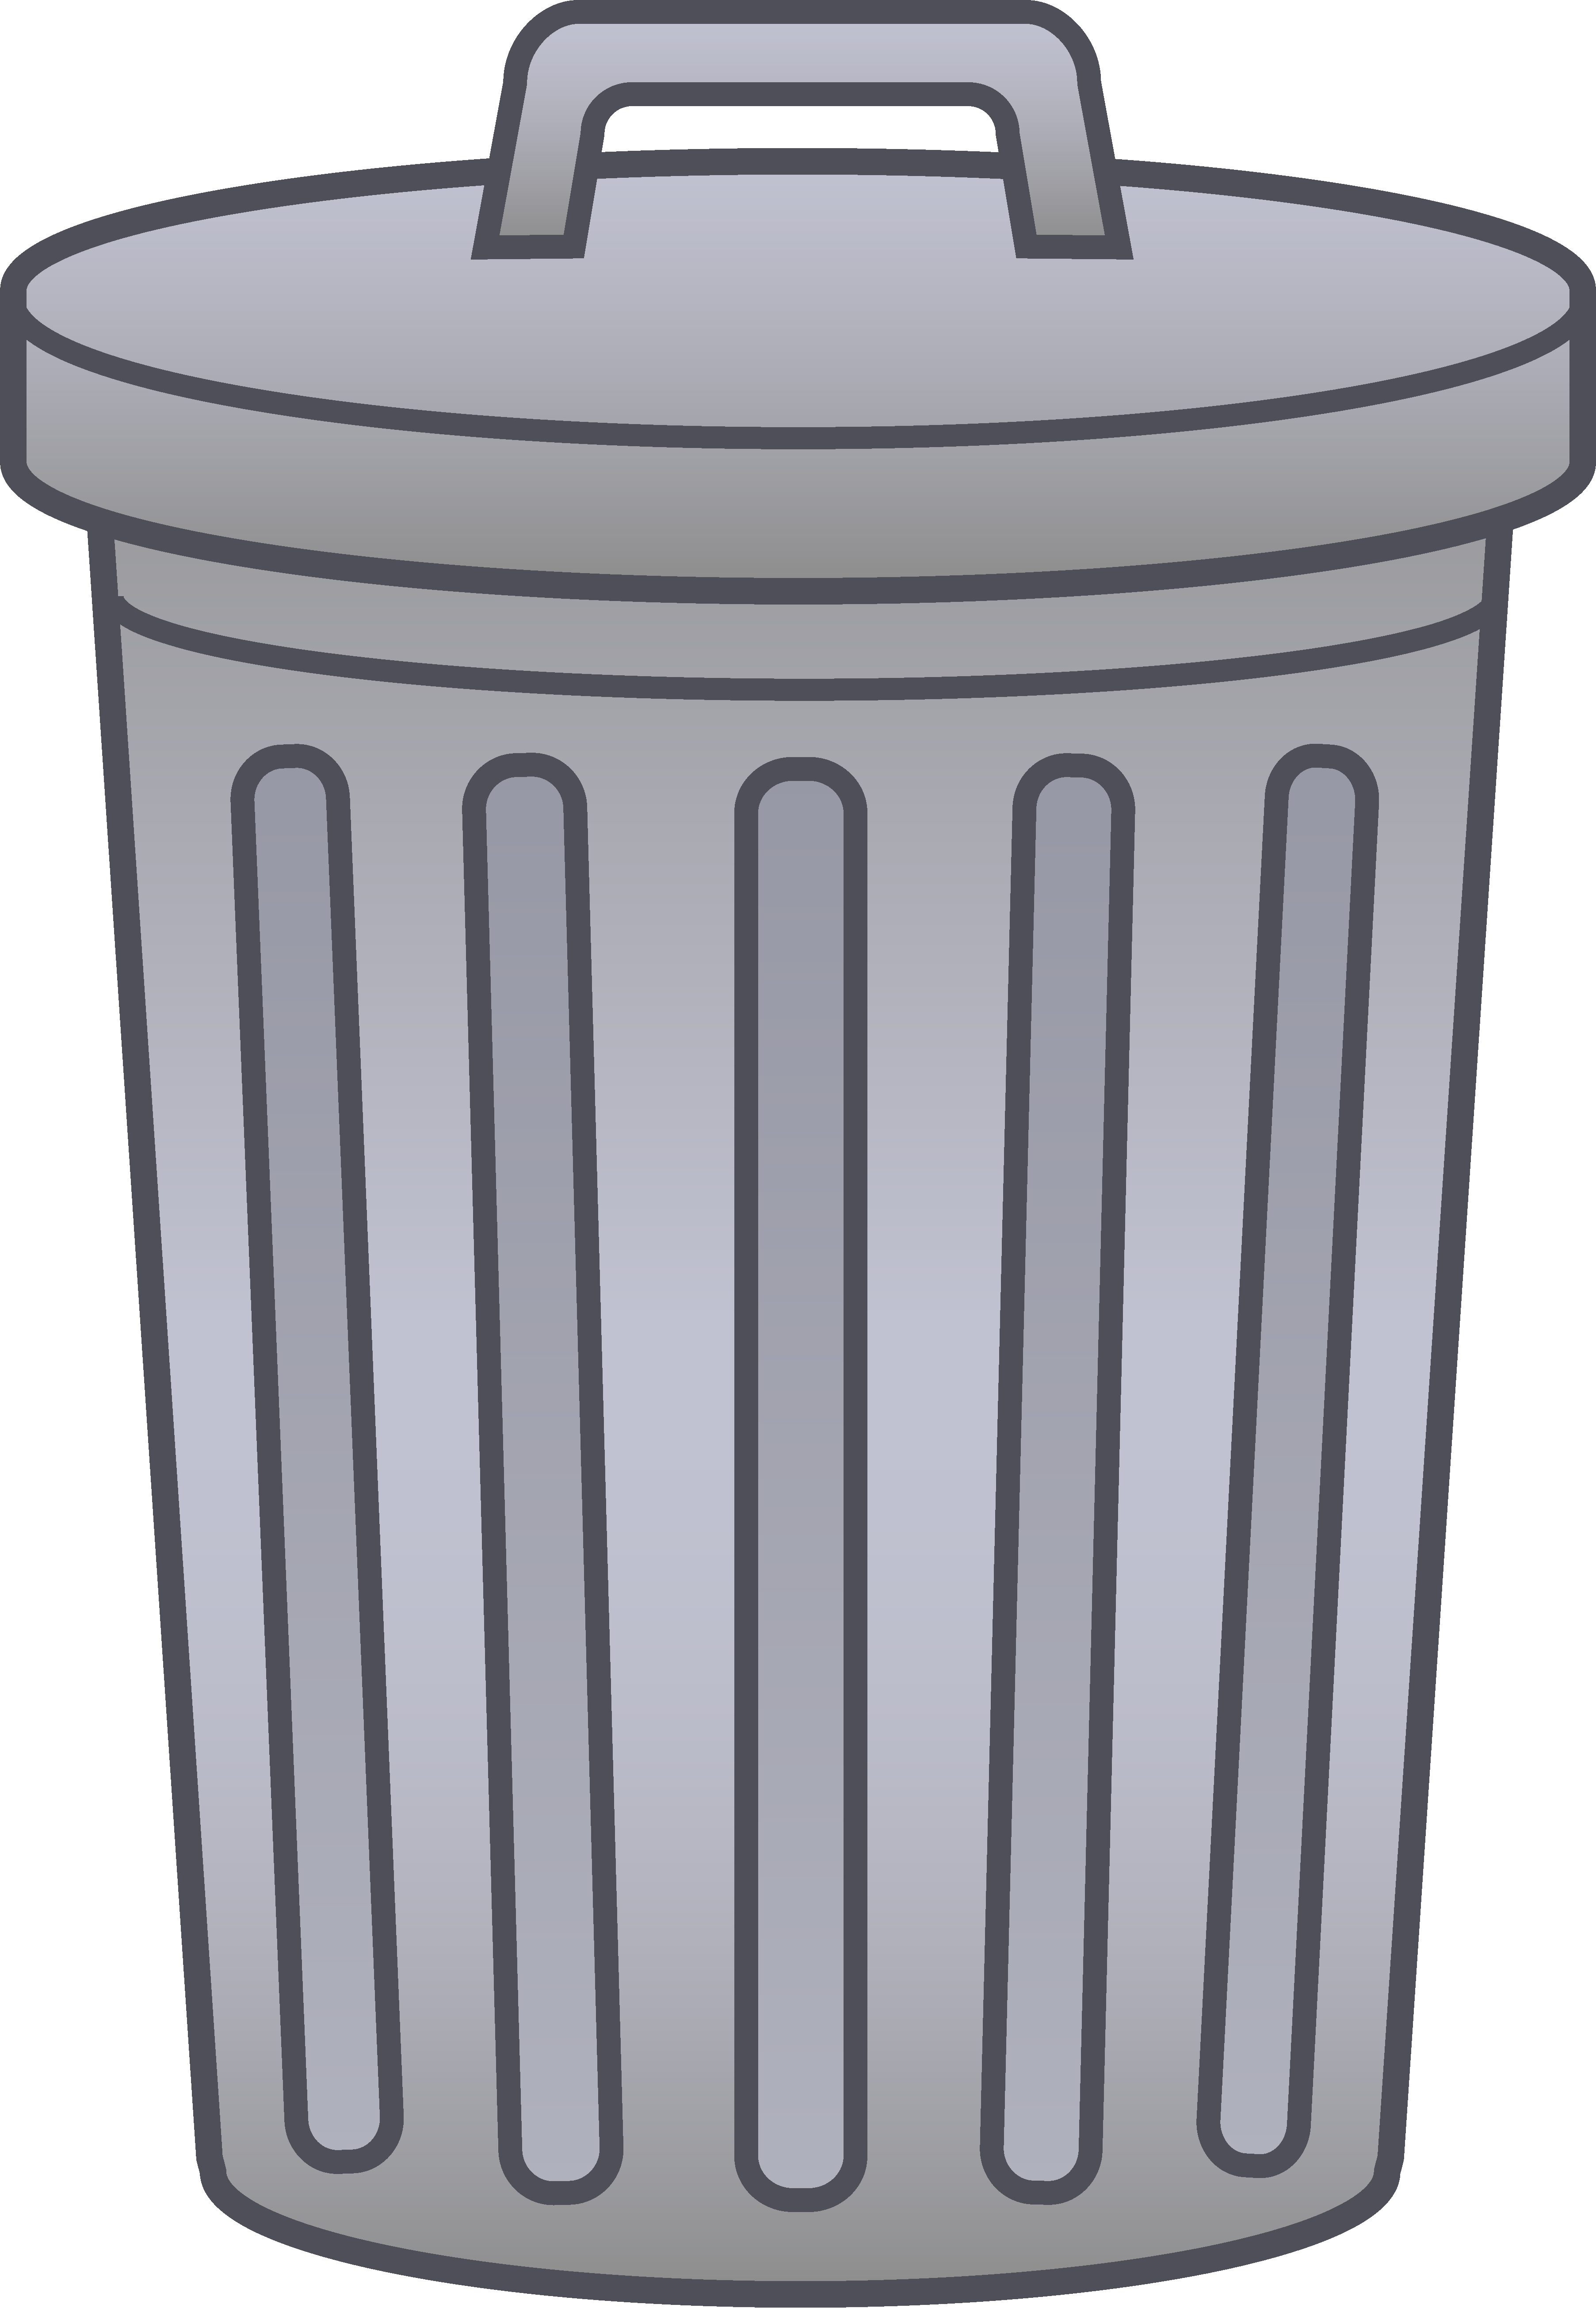 Trash Can Png Trash Can Silver And Other Colors Clipart Images Free